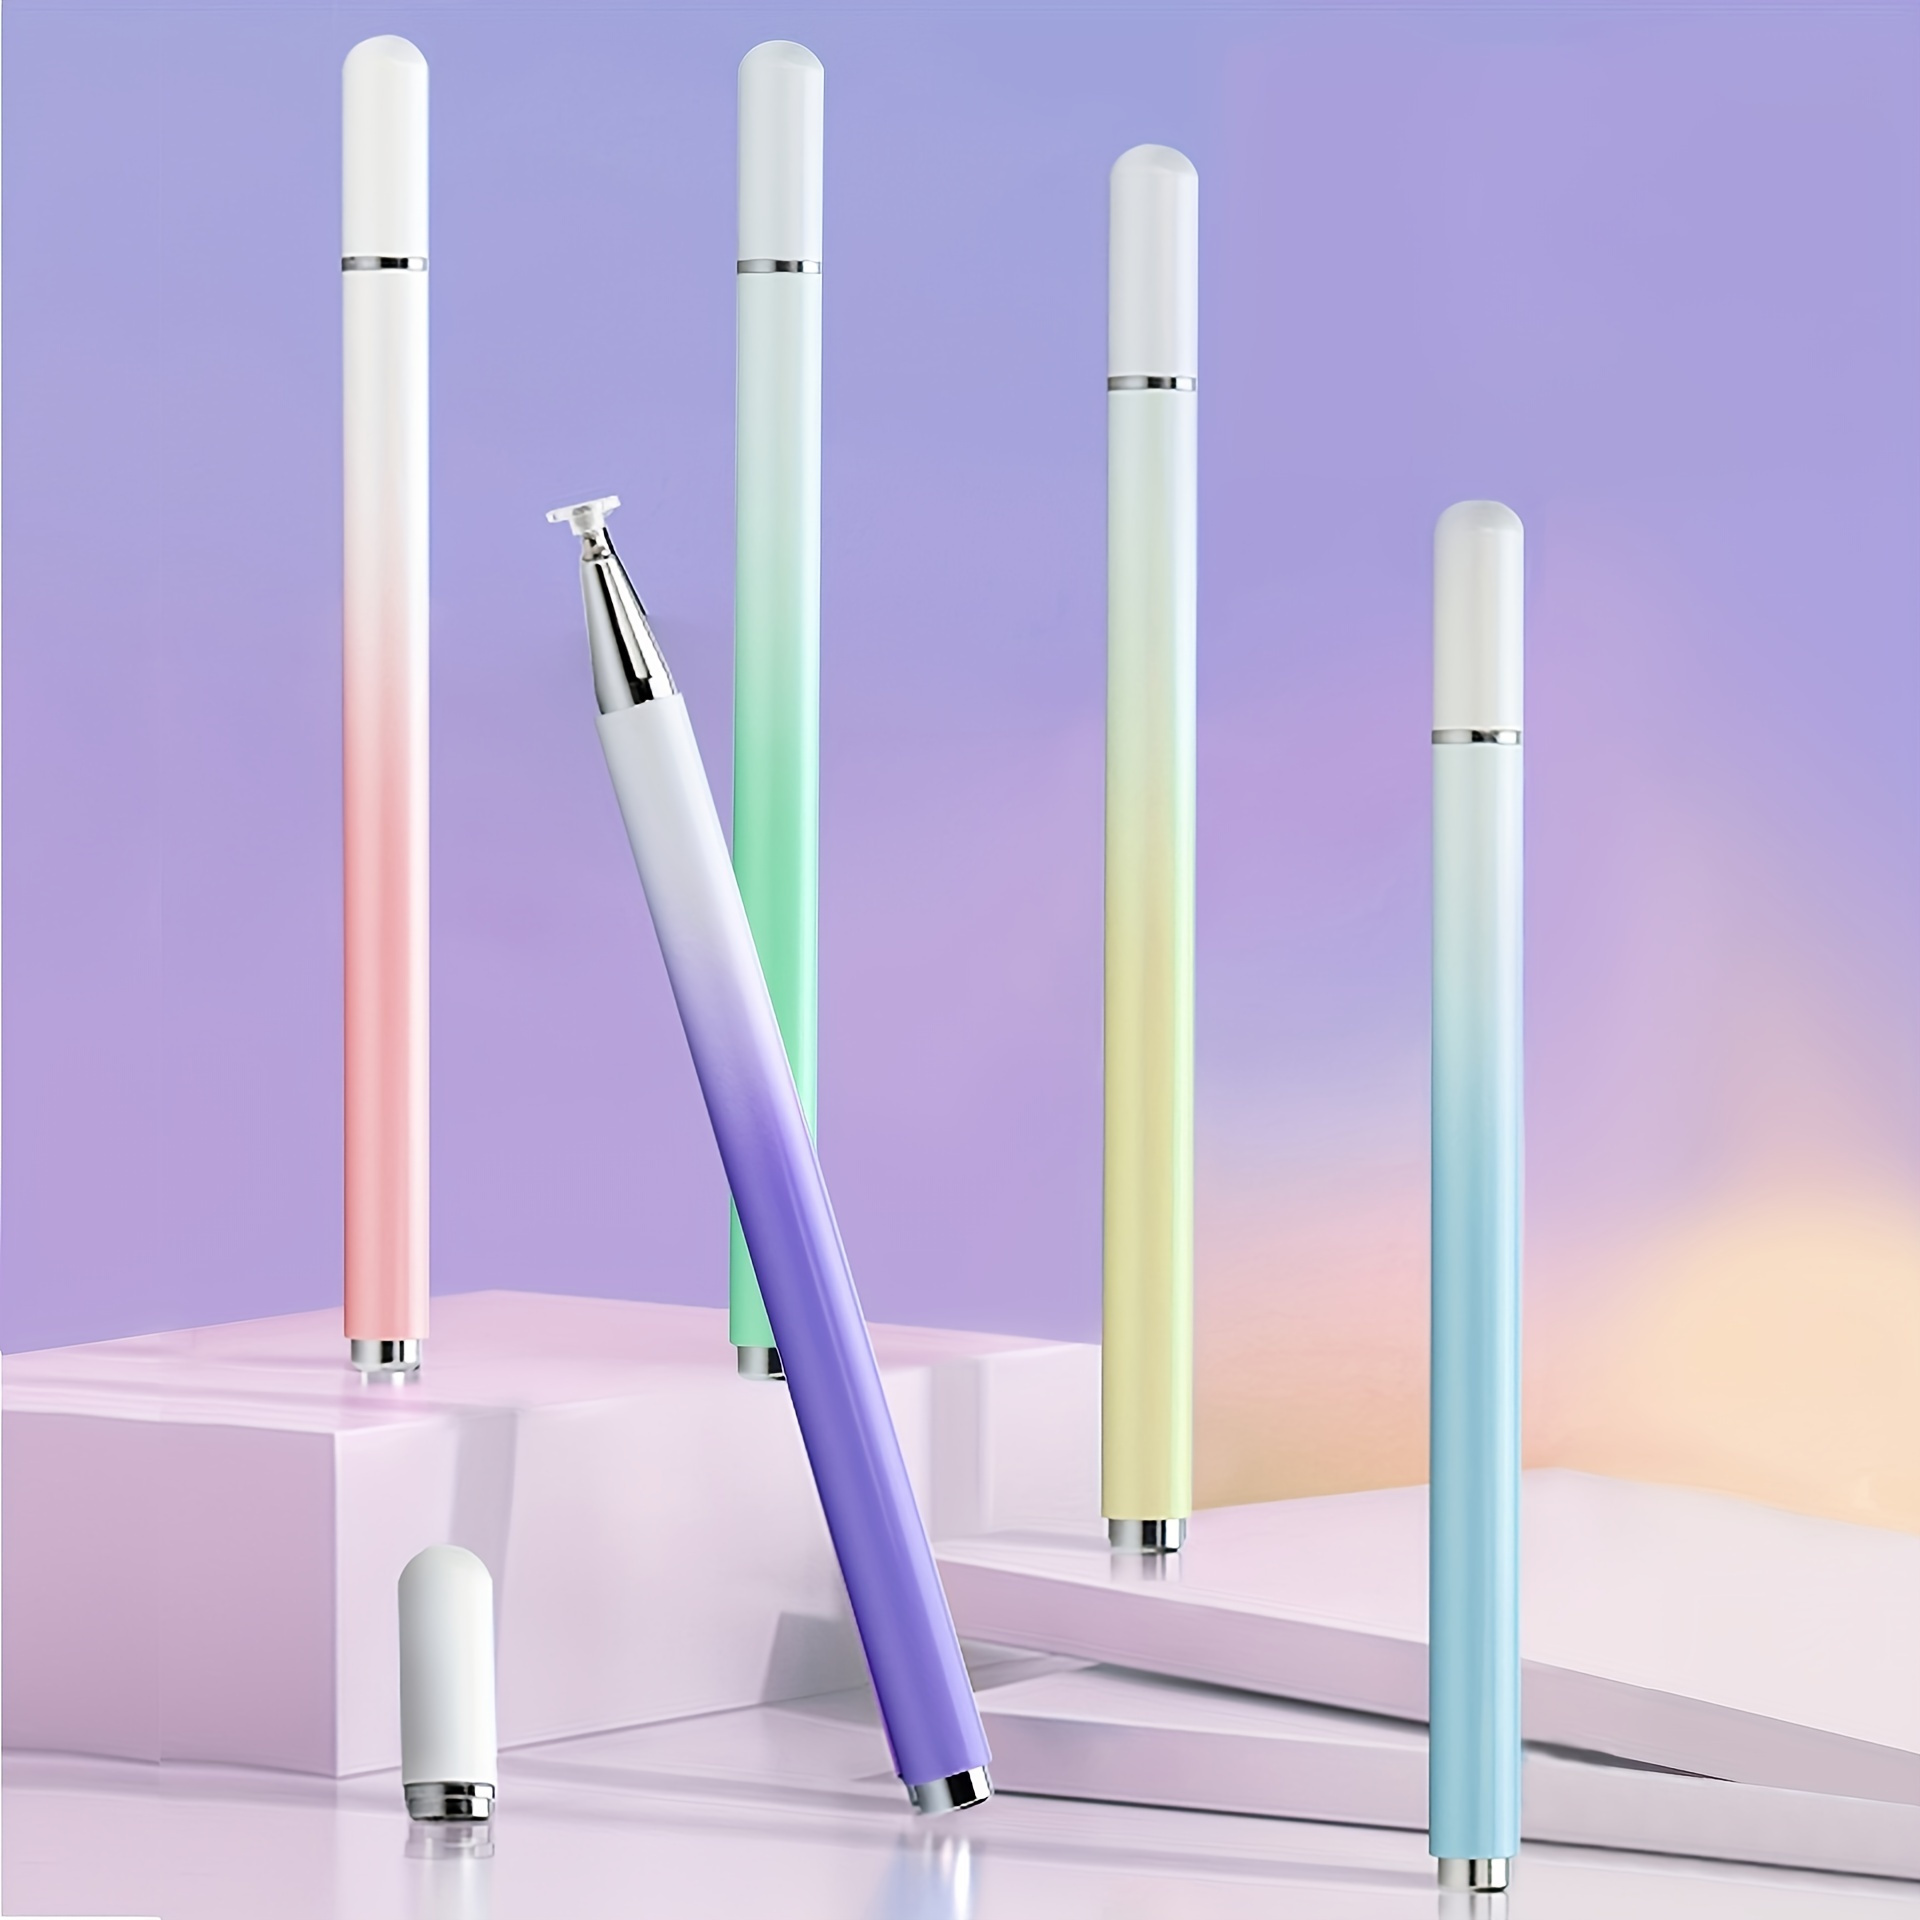 5pcs Different Color Pens For Note Taking, Ballpoint Pen Tip, Pen Holder  Type, For Phone Tablet Computer Capacitive, Office Stylus, Black Ink, Smart